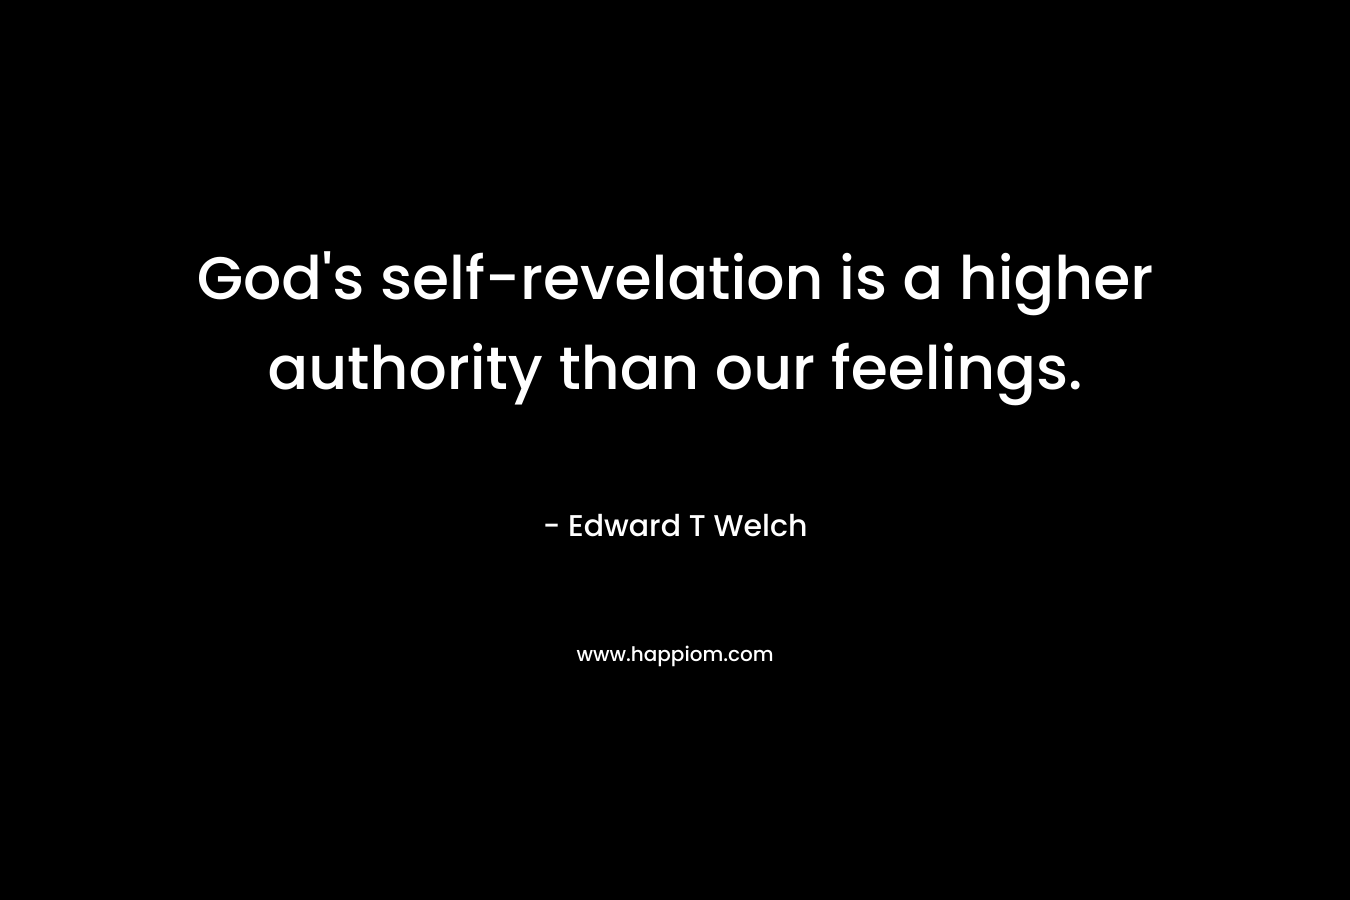 God's self-revelation is a higher authority than our feelings.